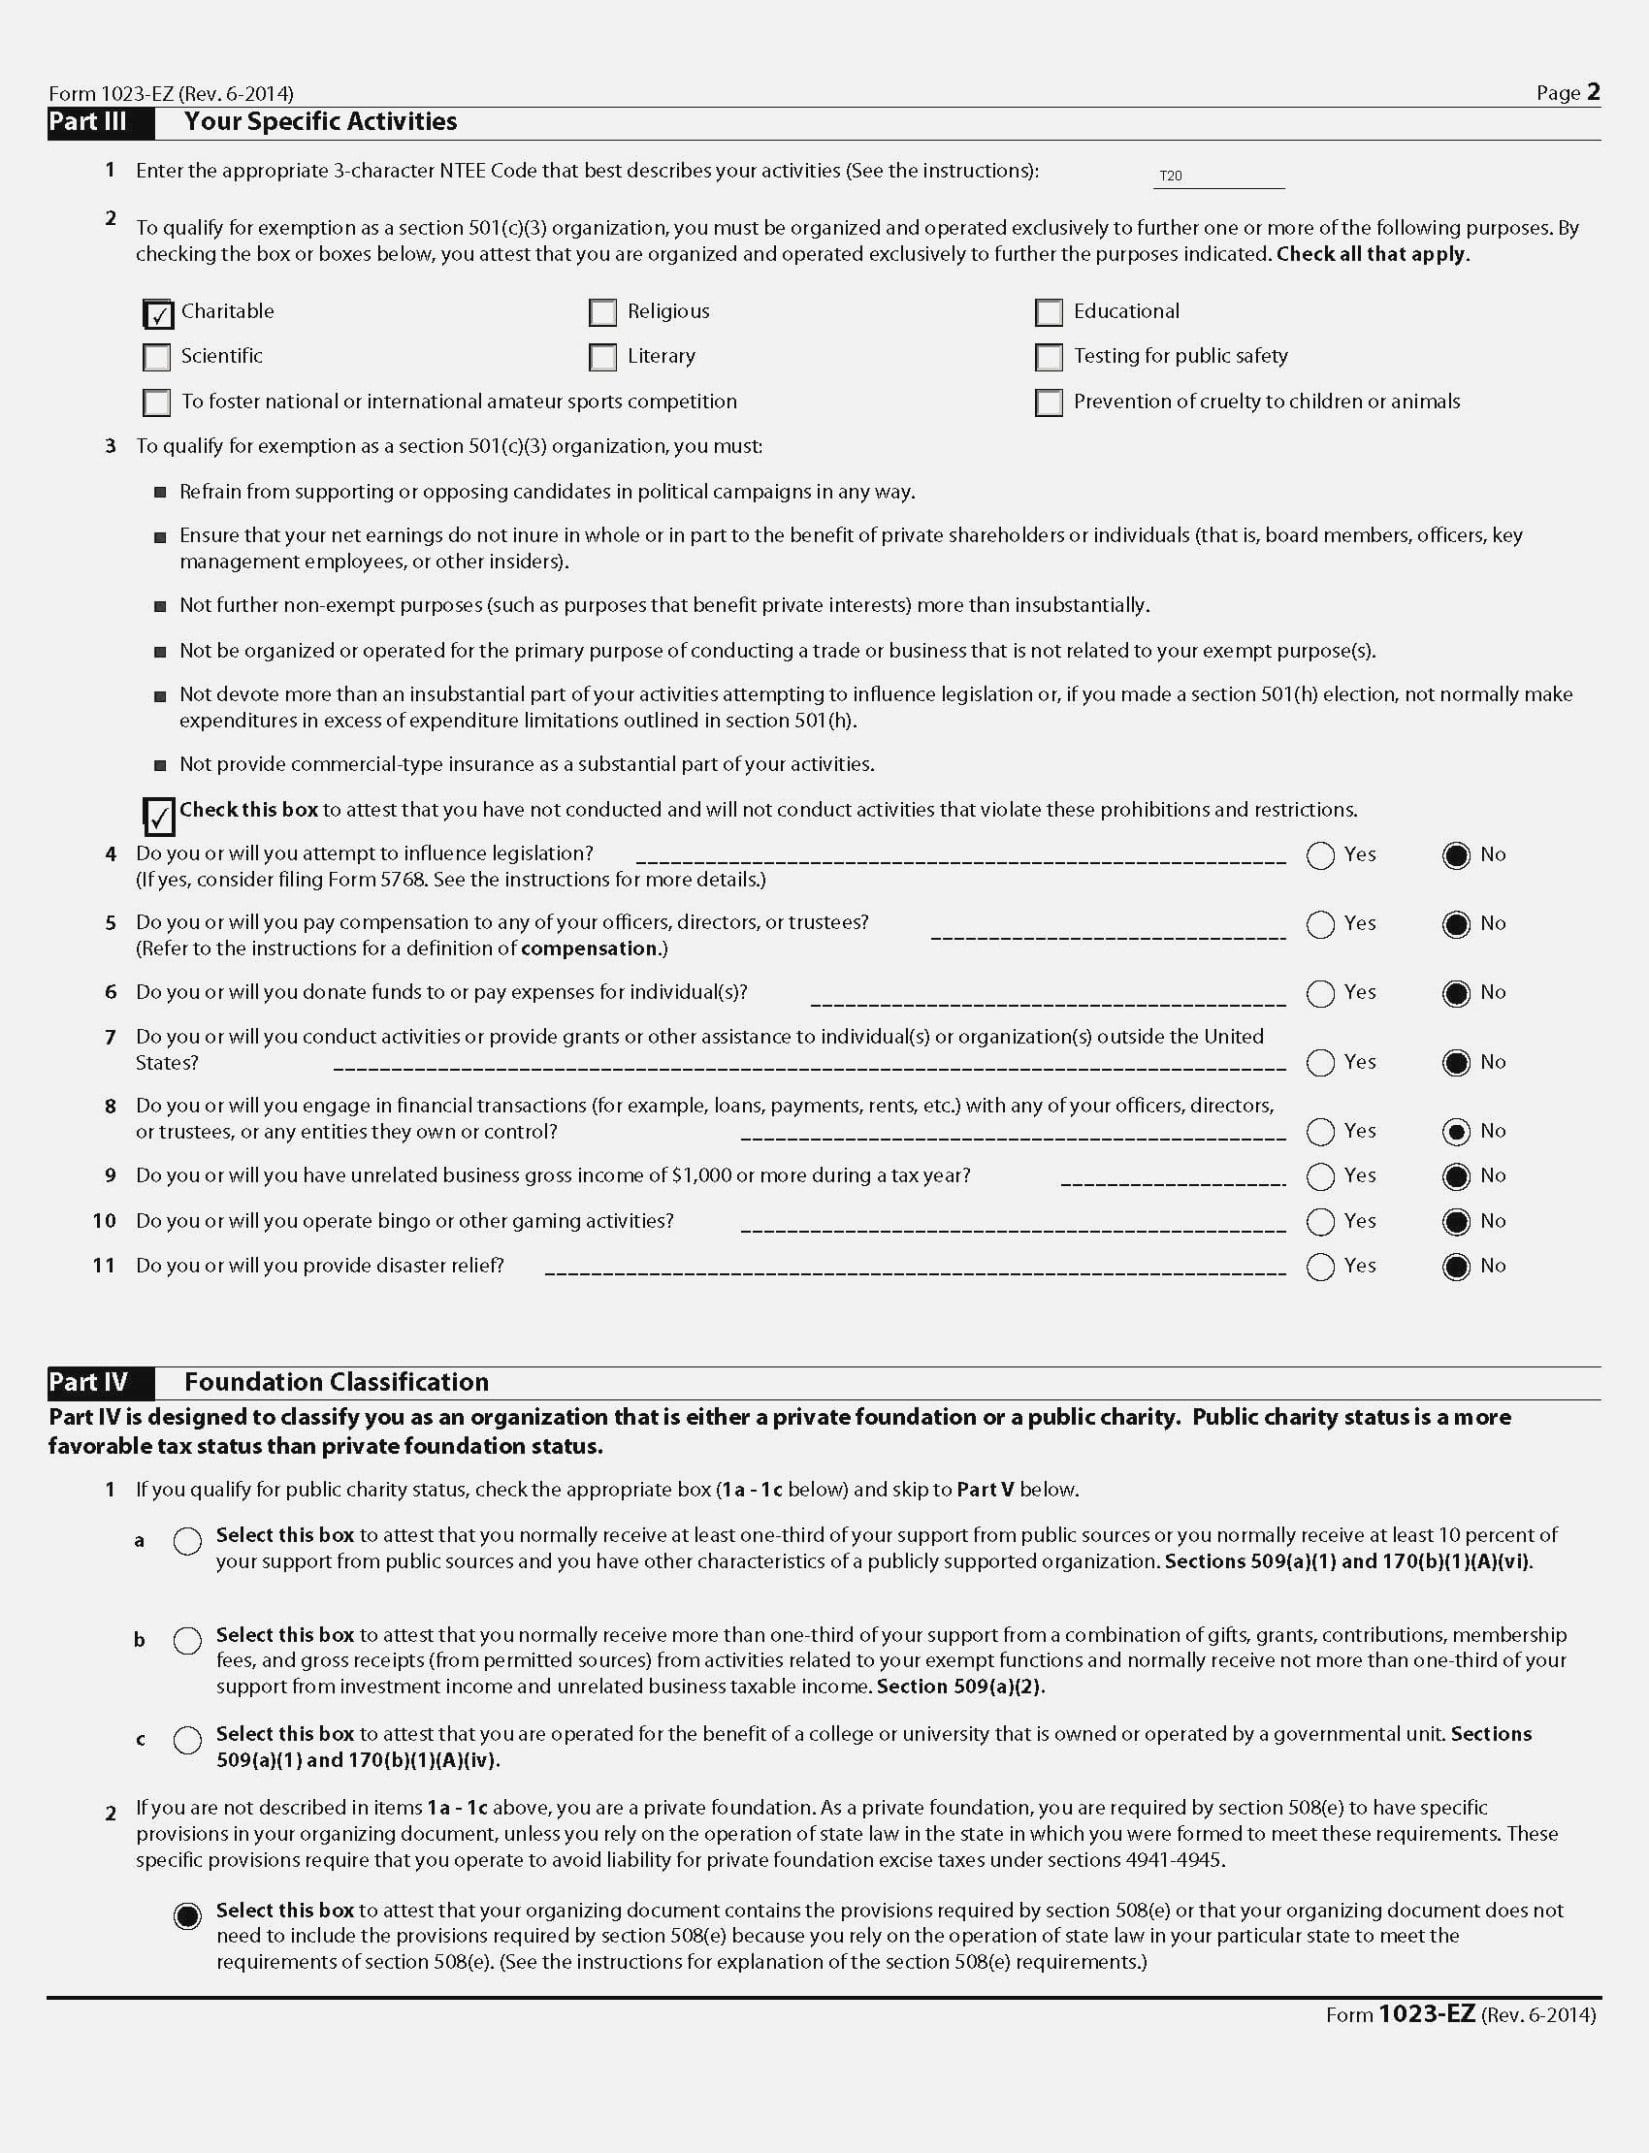 How To Leave Form 14 Ez  Realty Executives Mi  Invoice And Resume Together With 1023 Ez Eligibility Worksheet